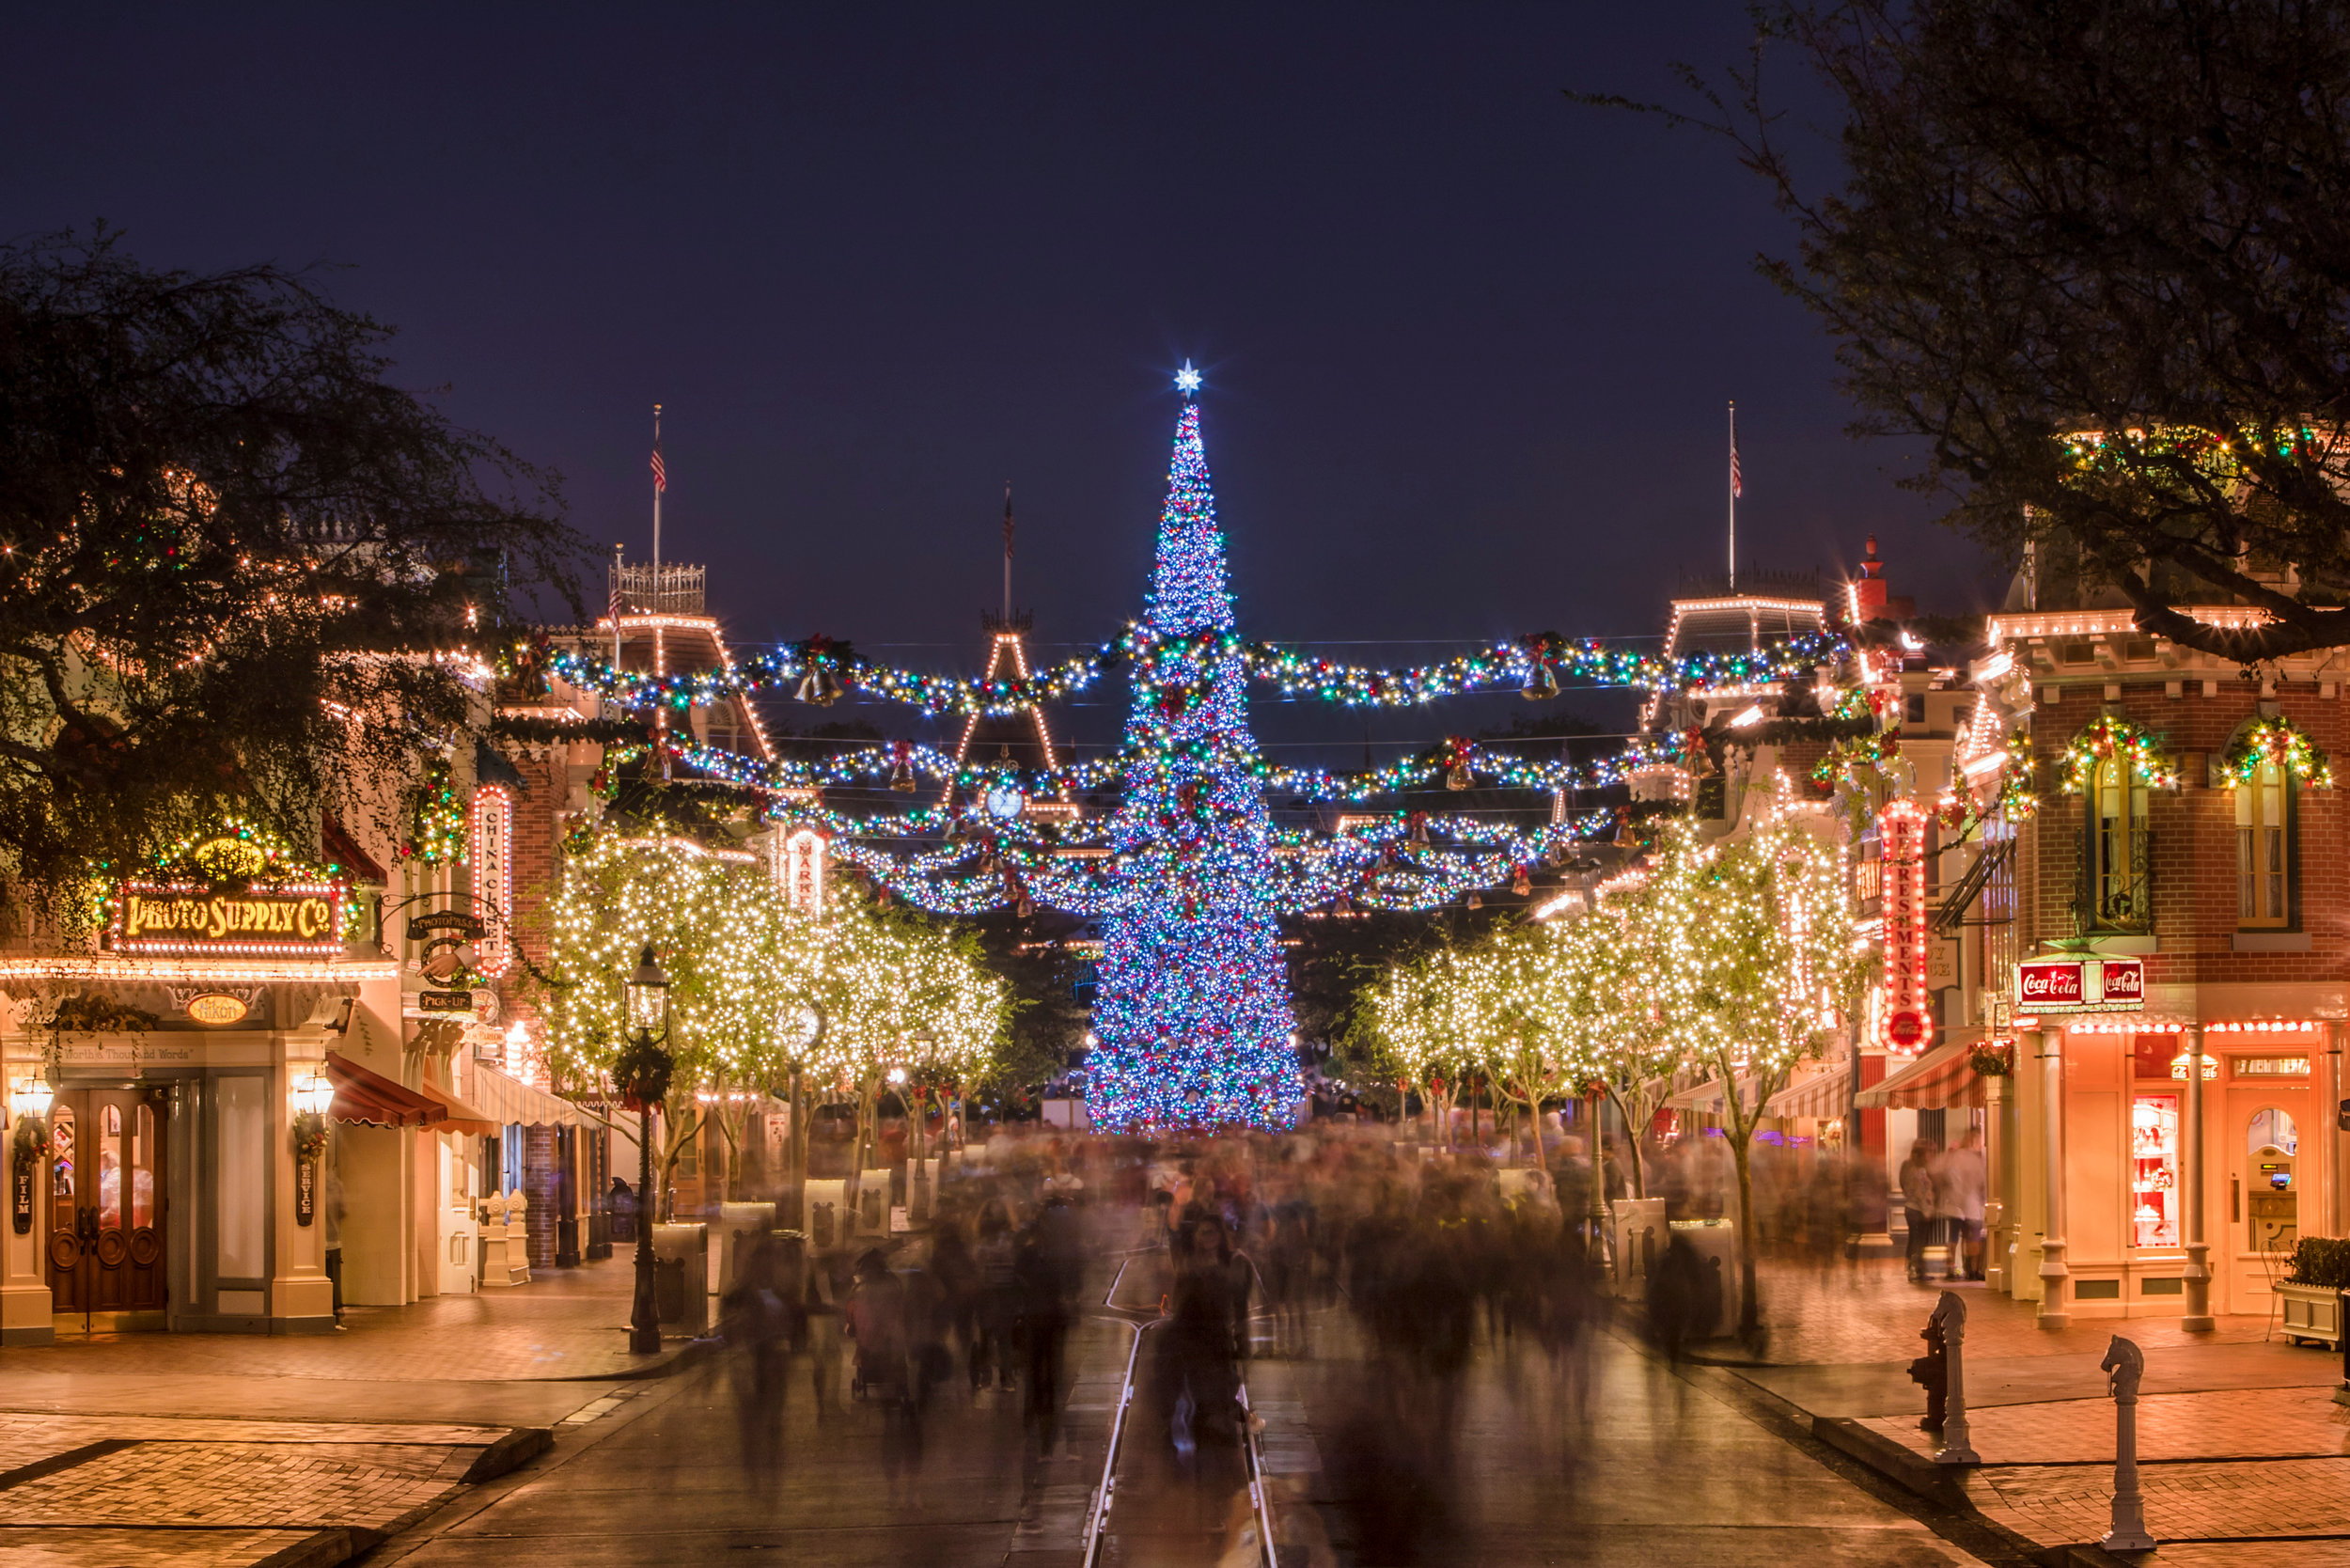  HOLIDAYS AT THE DISNEYLAND RESORT (ANAHEIM, Calif.) � The Disneyland Resort is a magical place for creating holiday memories with family and friends. Holidays at the Disneyland Resort returns Nov. 9, 2018 through Jan.6, 2019, featuring seasonal offe